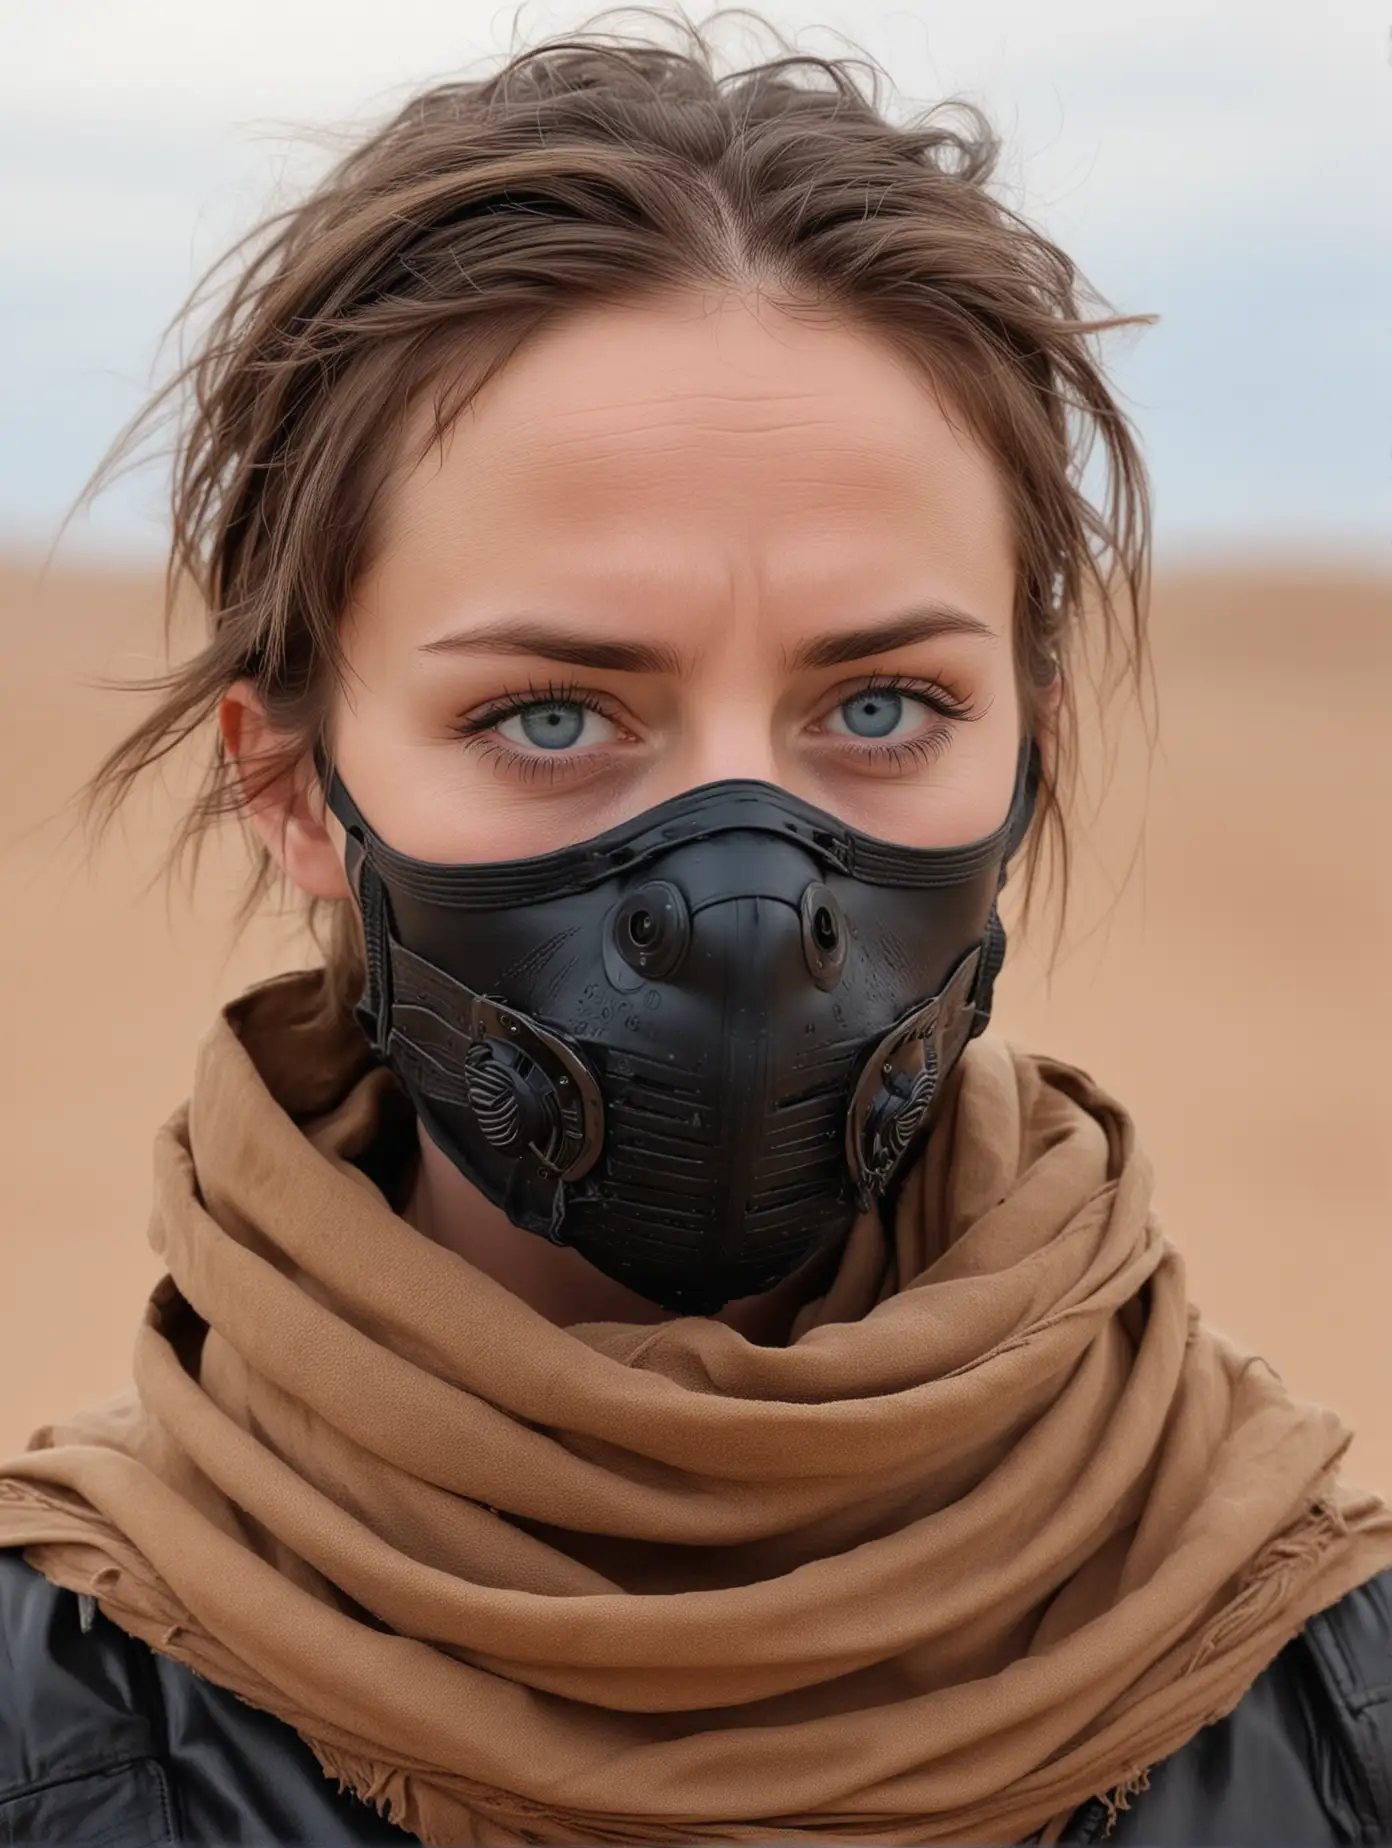 Rugged Desert Explorer in Leather Outfit with Breathing Mask